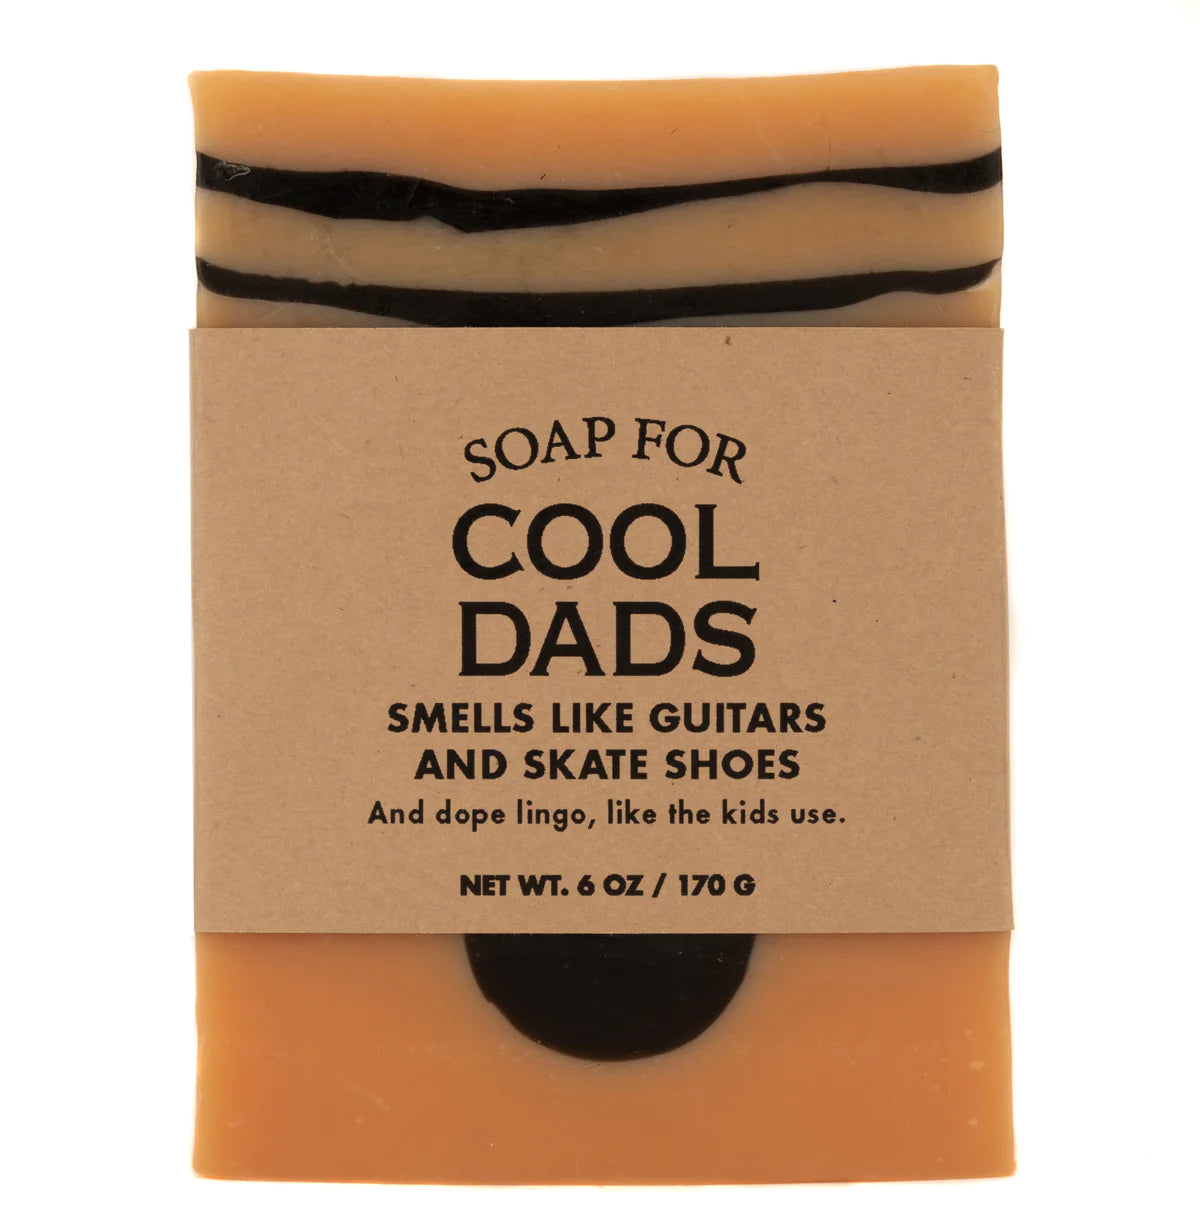 Whisky River Soap Co. - A Soap For Cool Dads